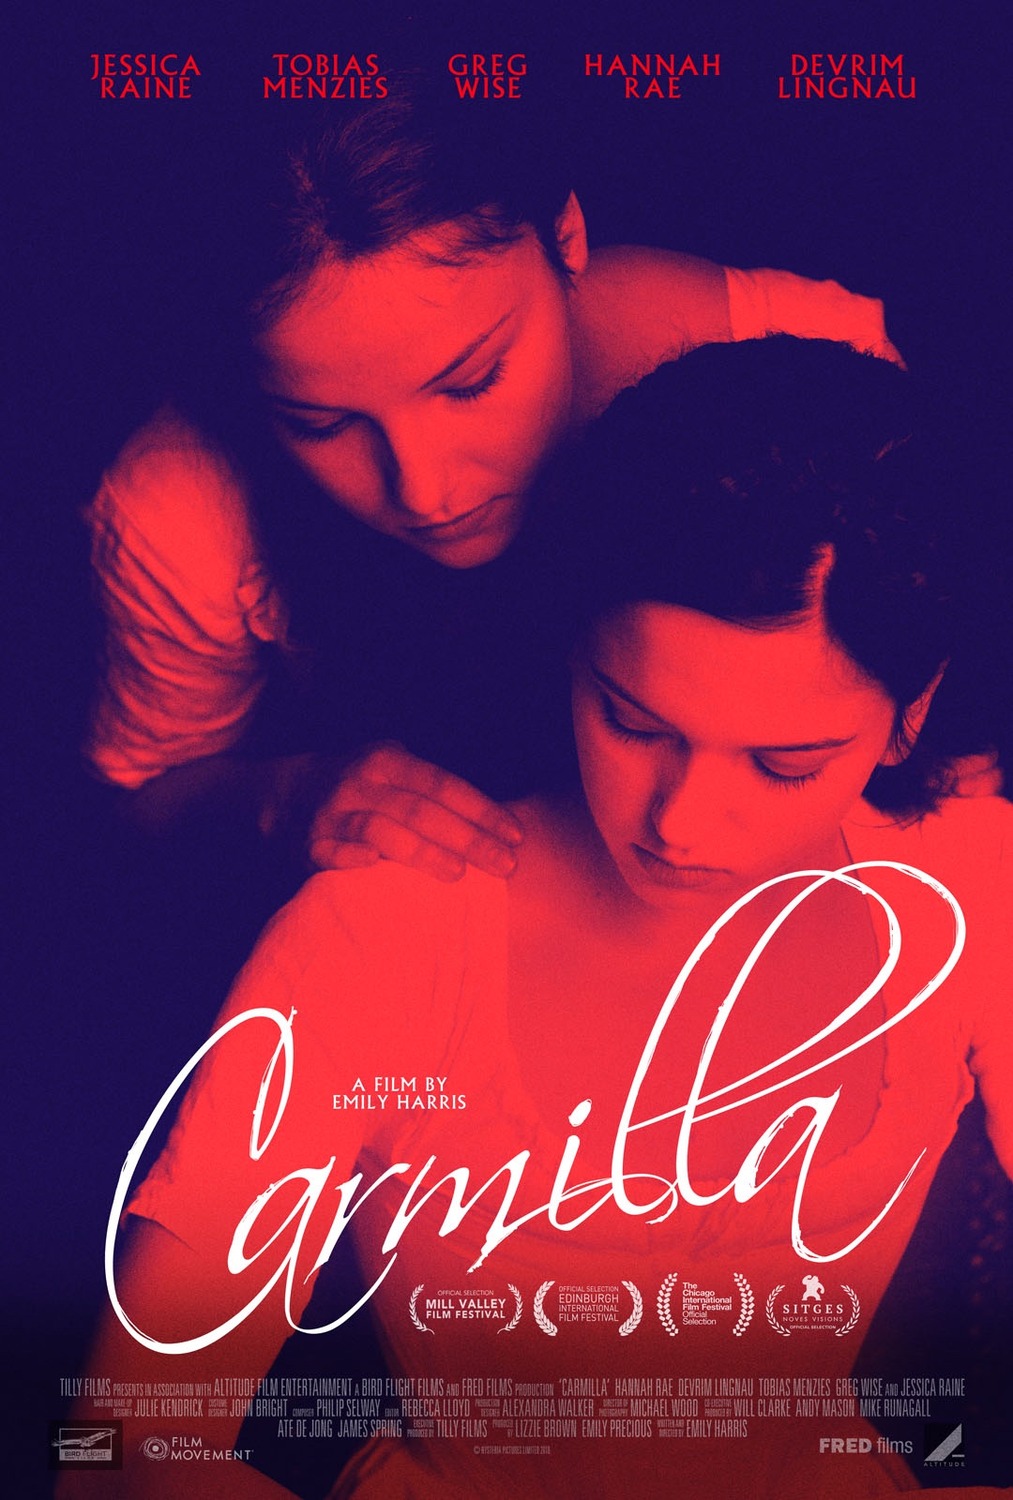 Extra Large Movie Poster Image for Carmilla (#2 of 2)